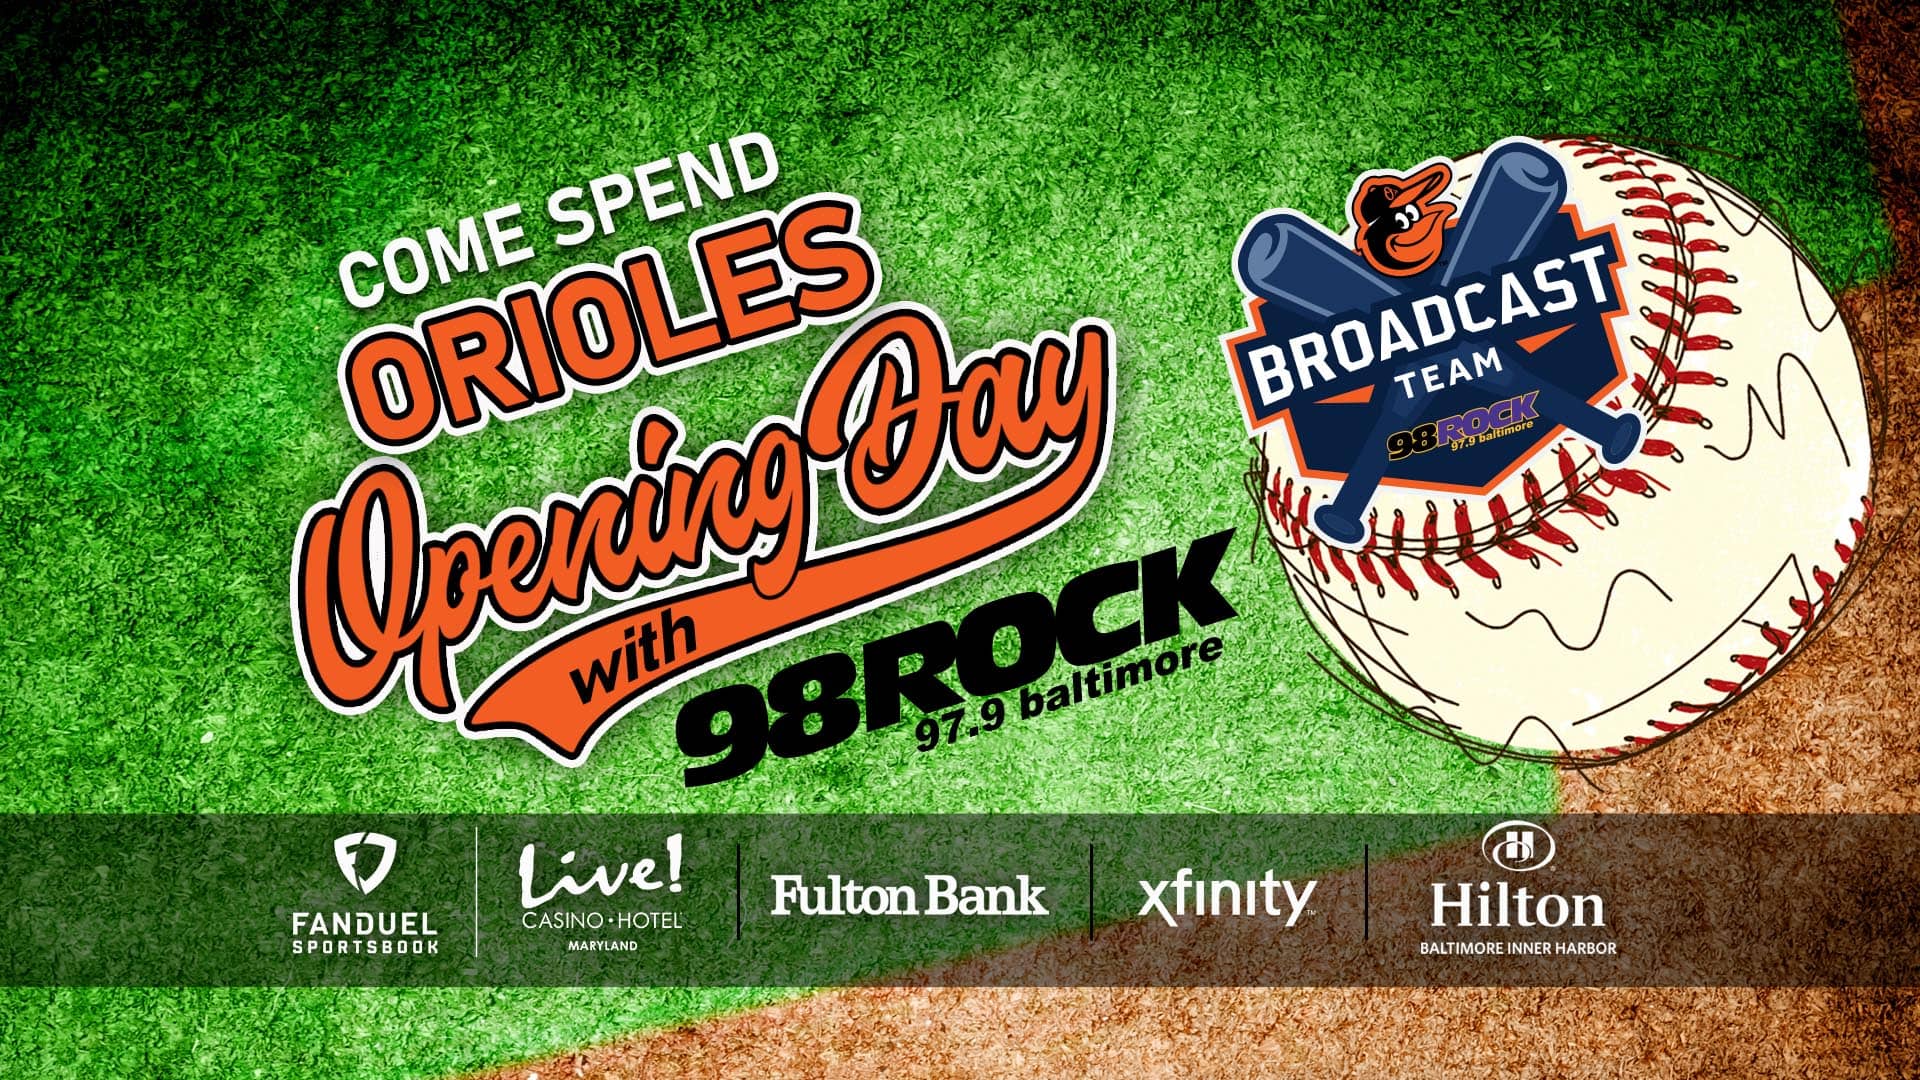 NOW FRIDAY!!!! Spend Orioles Opening Day with 98 Rock